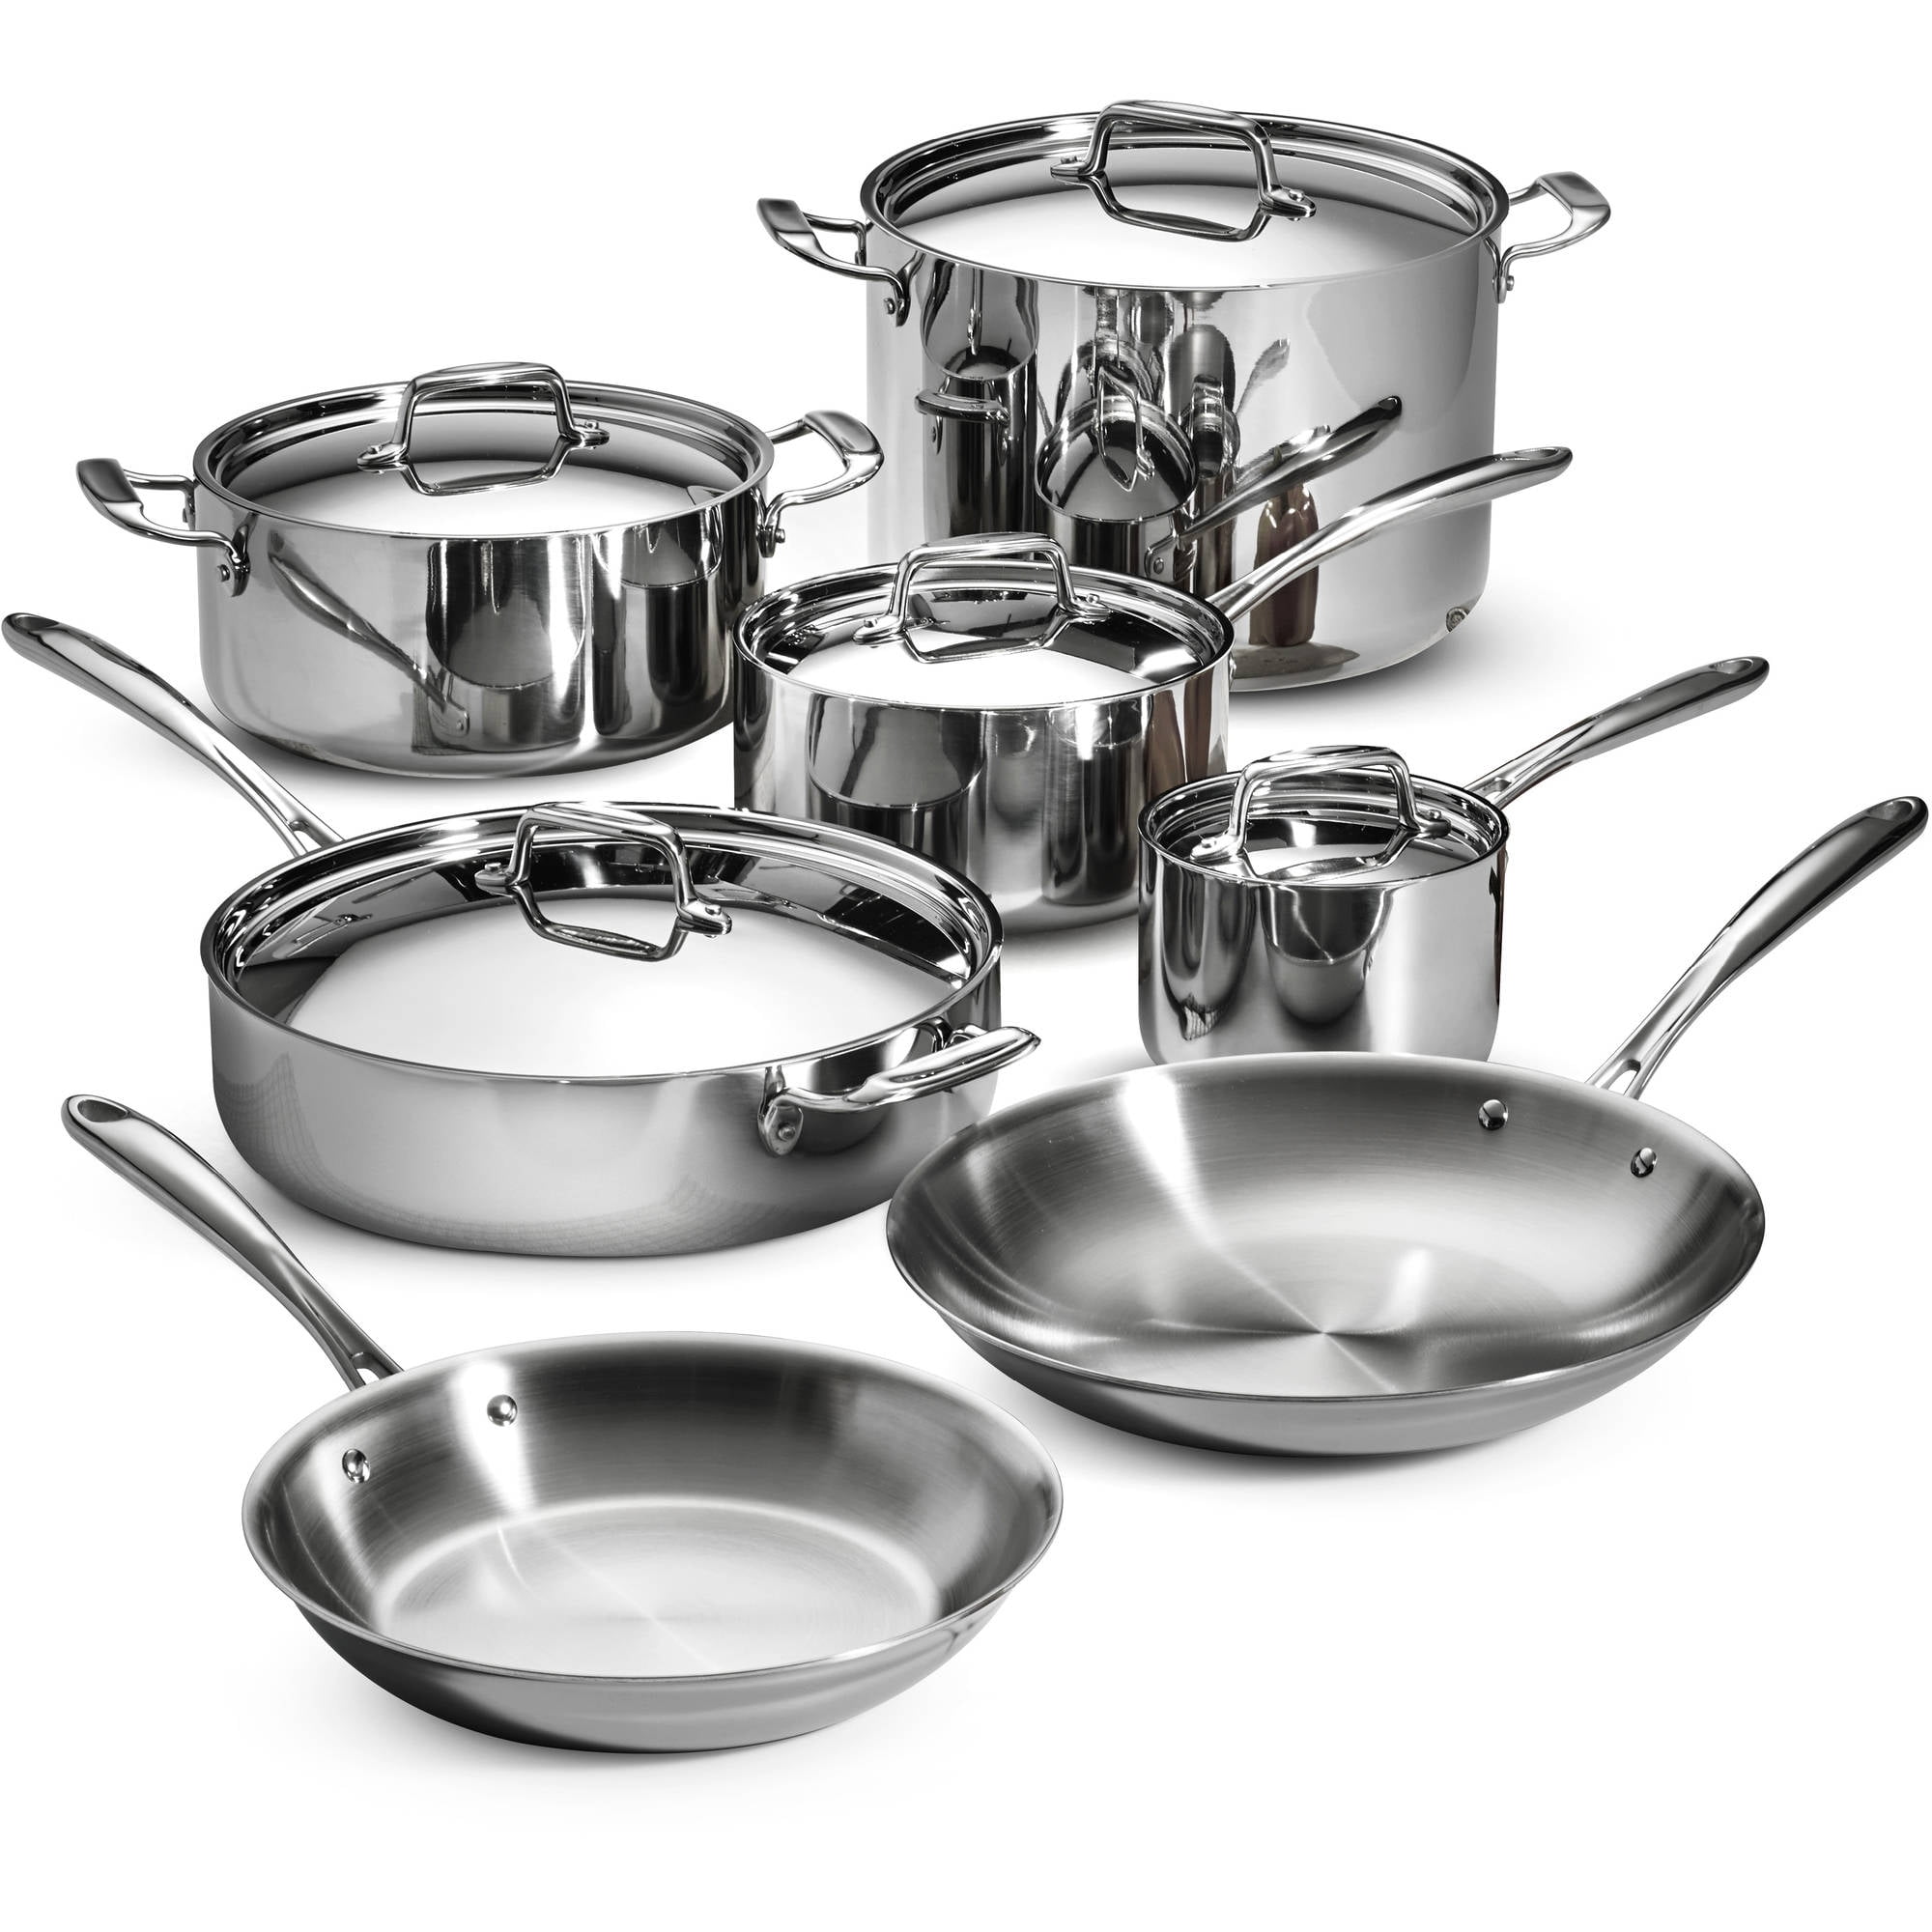 Tramontina 12-Piece Stainless Steel Tri-Ply Clad Cookware Set Tramontina 12 Piece Tri Ply Clad Stainless Steel Cookware Set